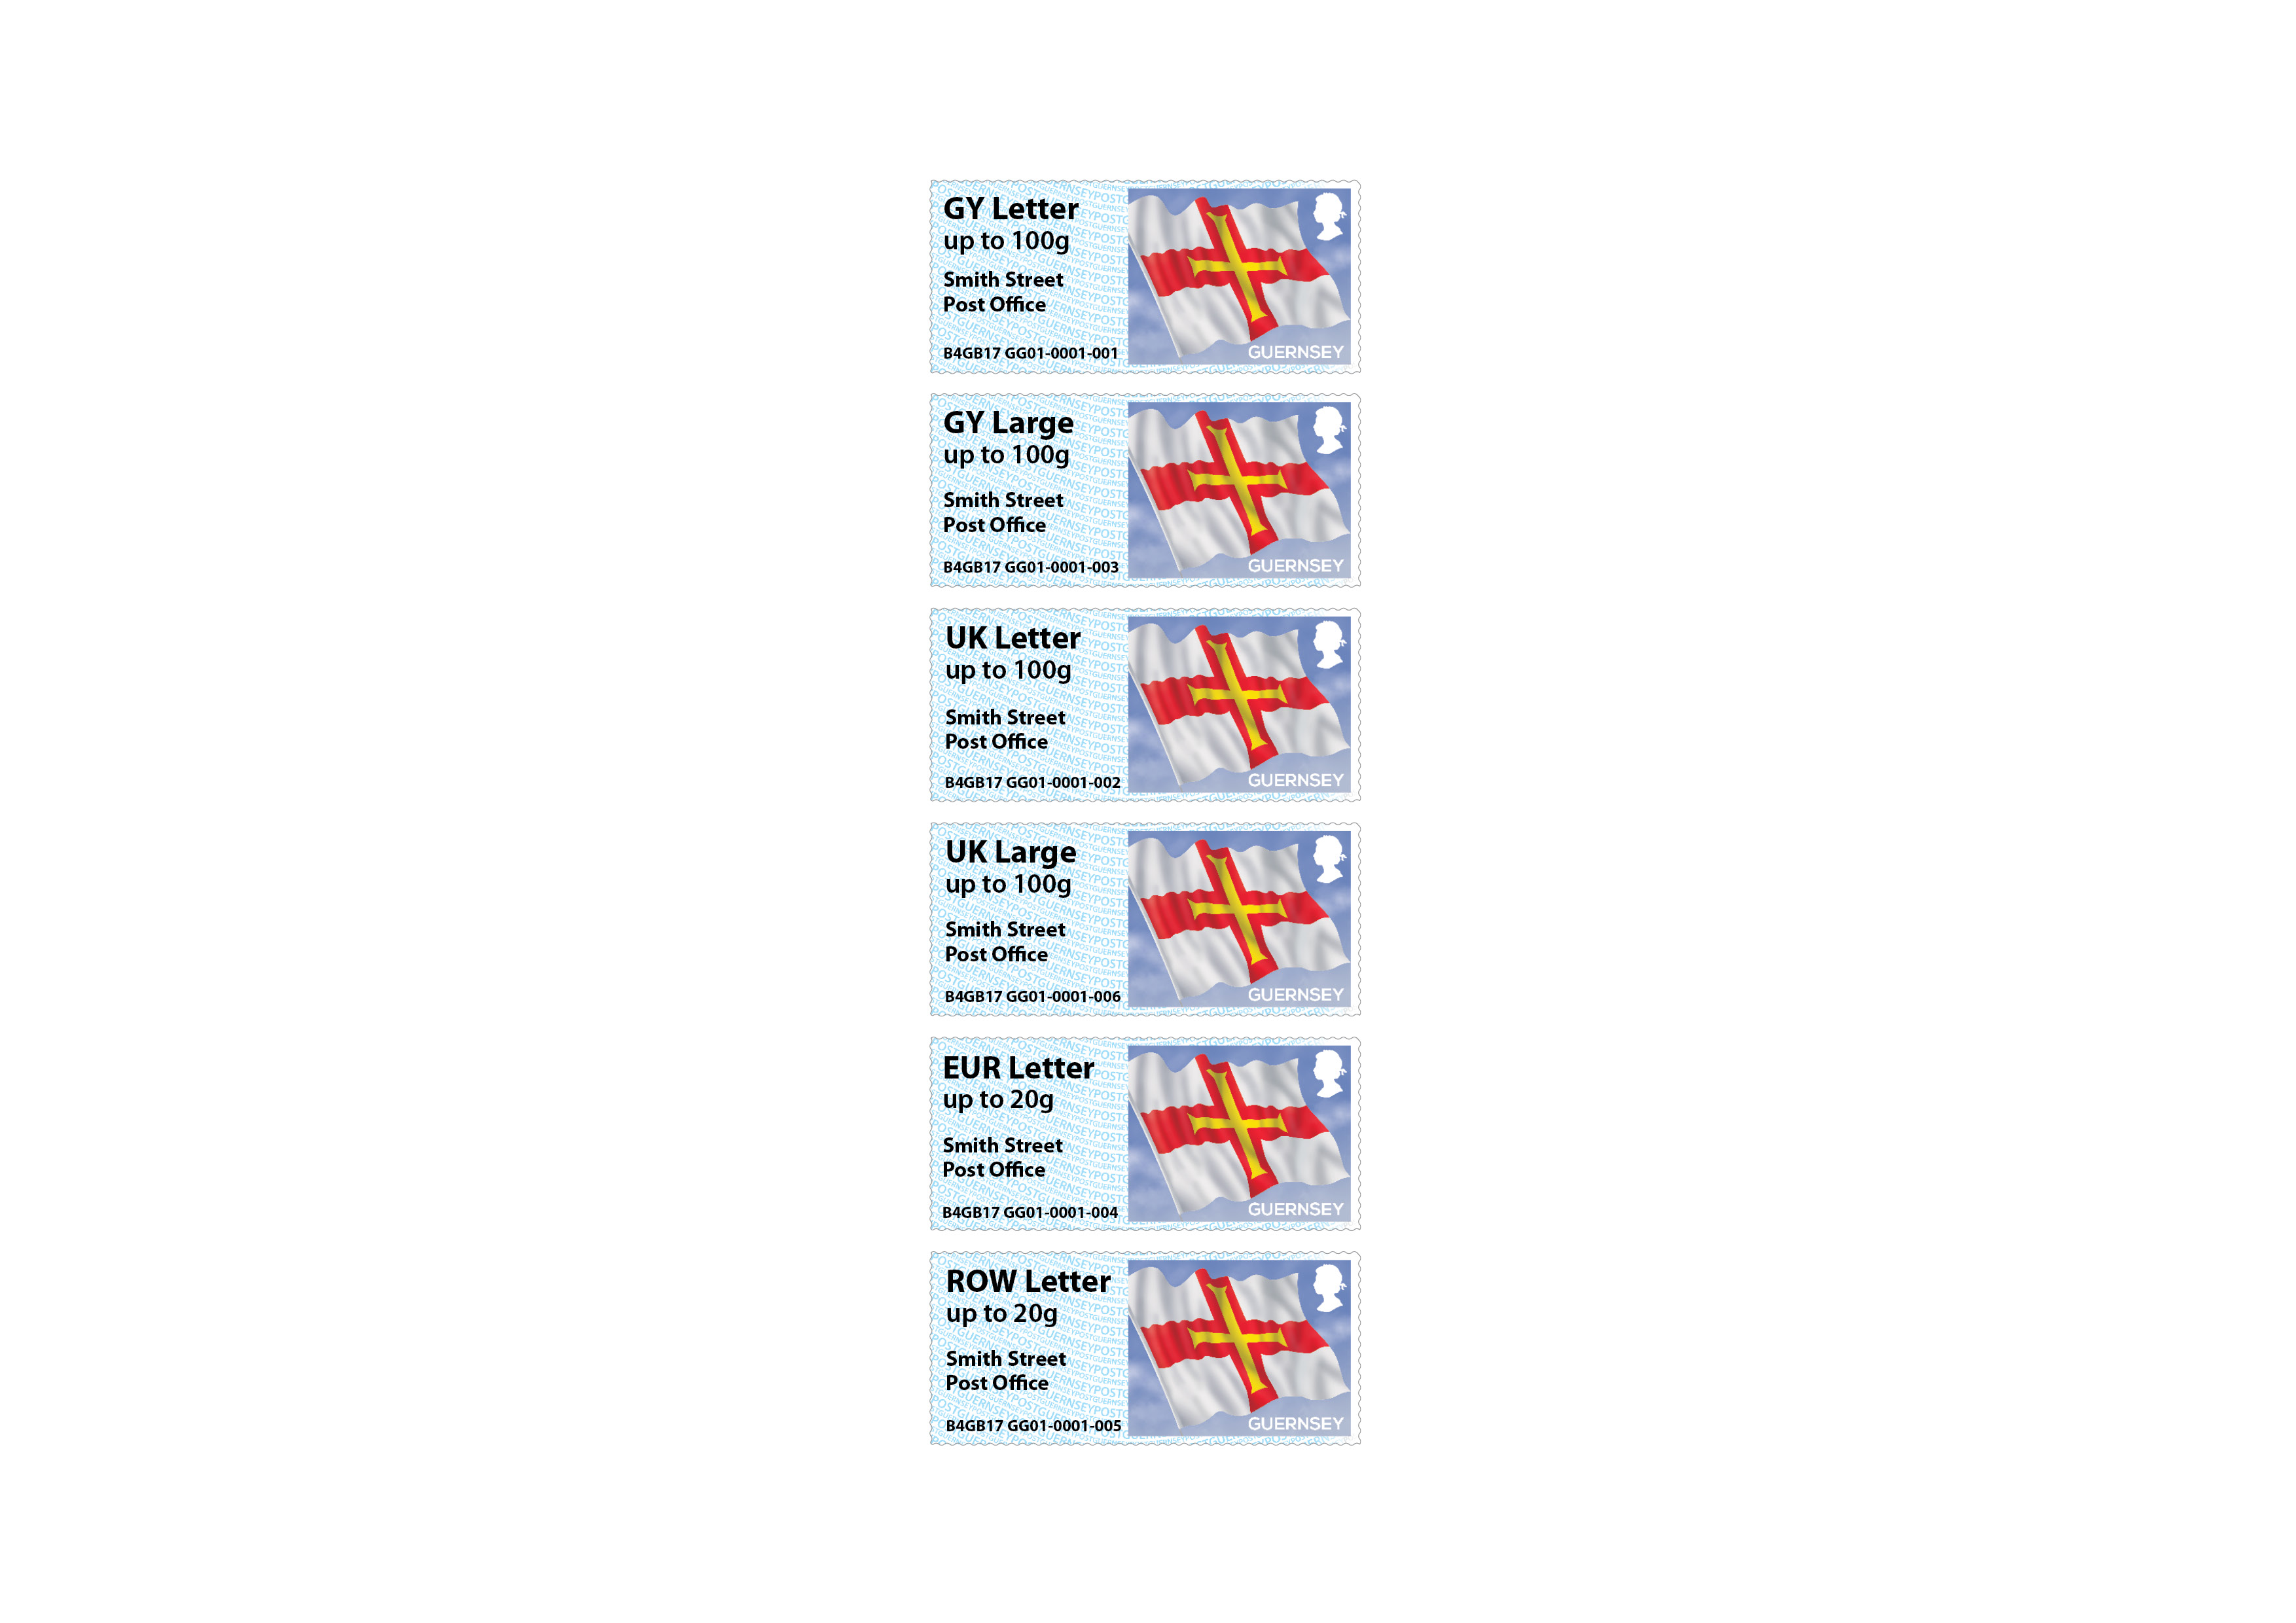 Guernsey to vend Post & Go stamps at Smith Street Post Office